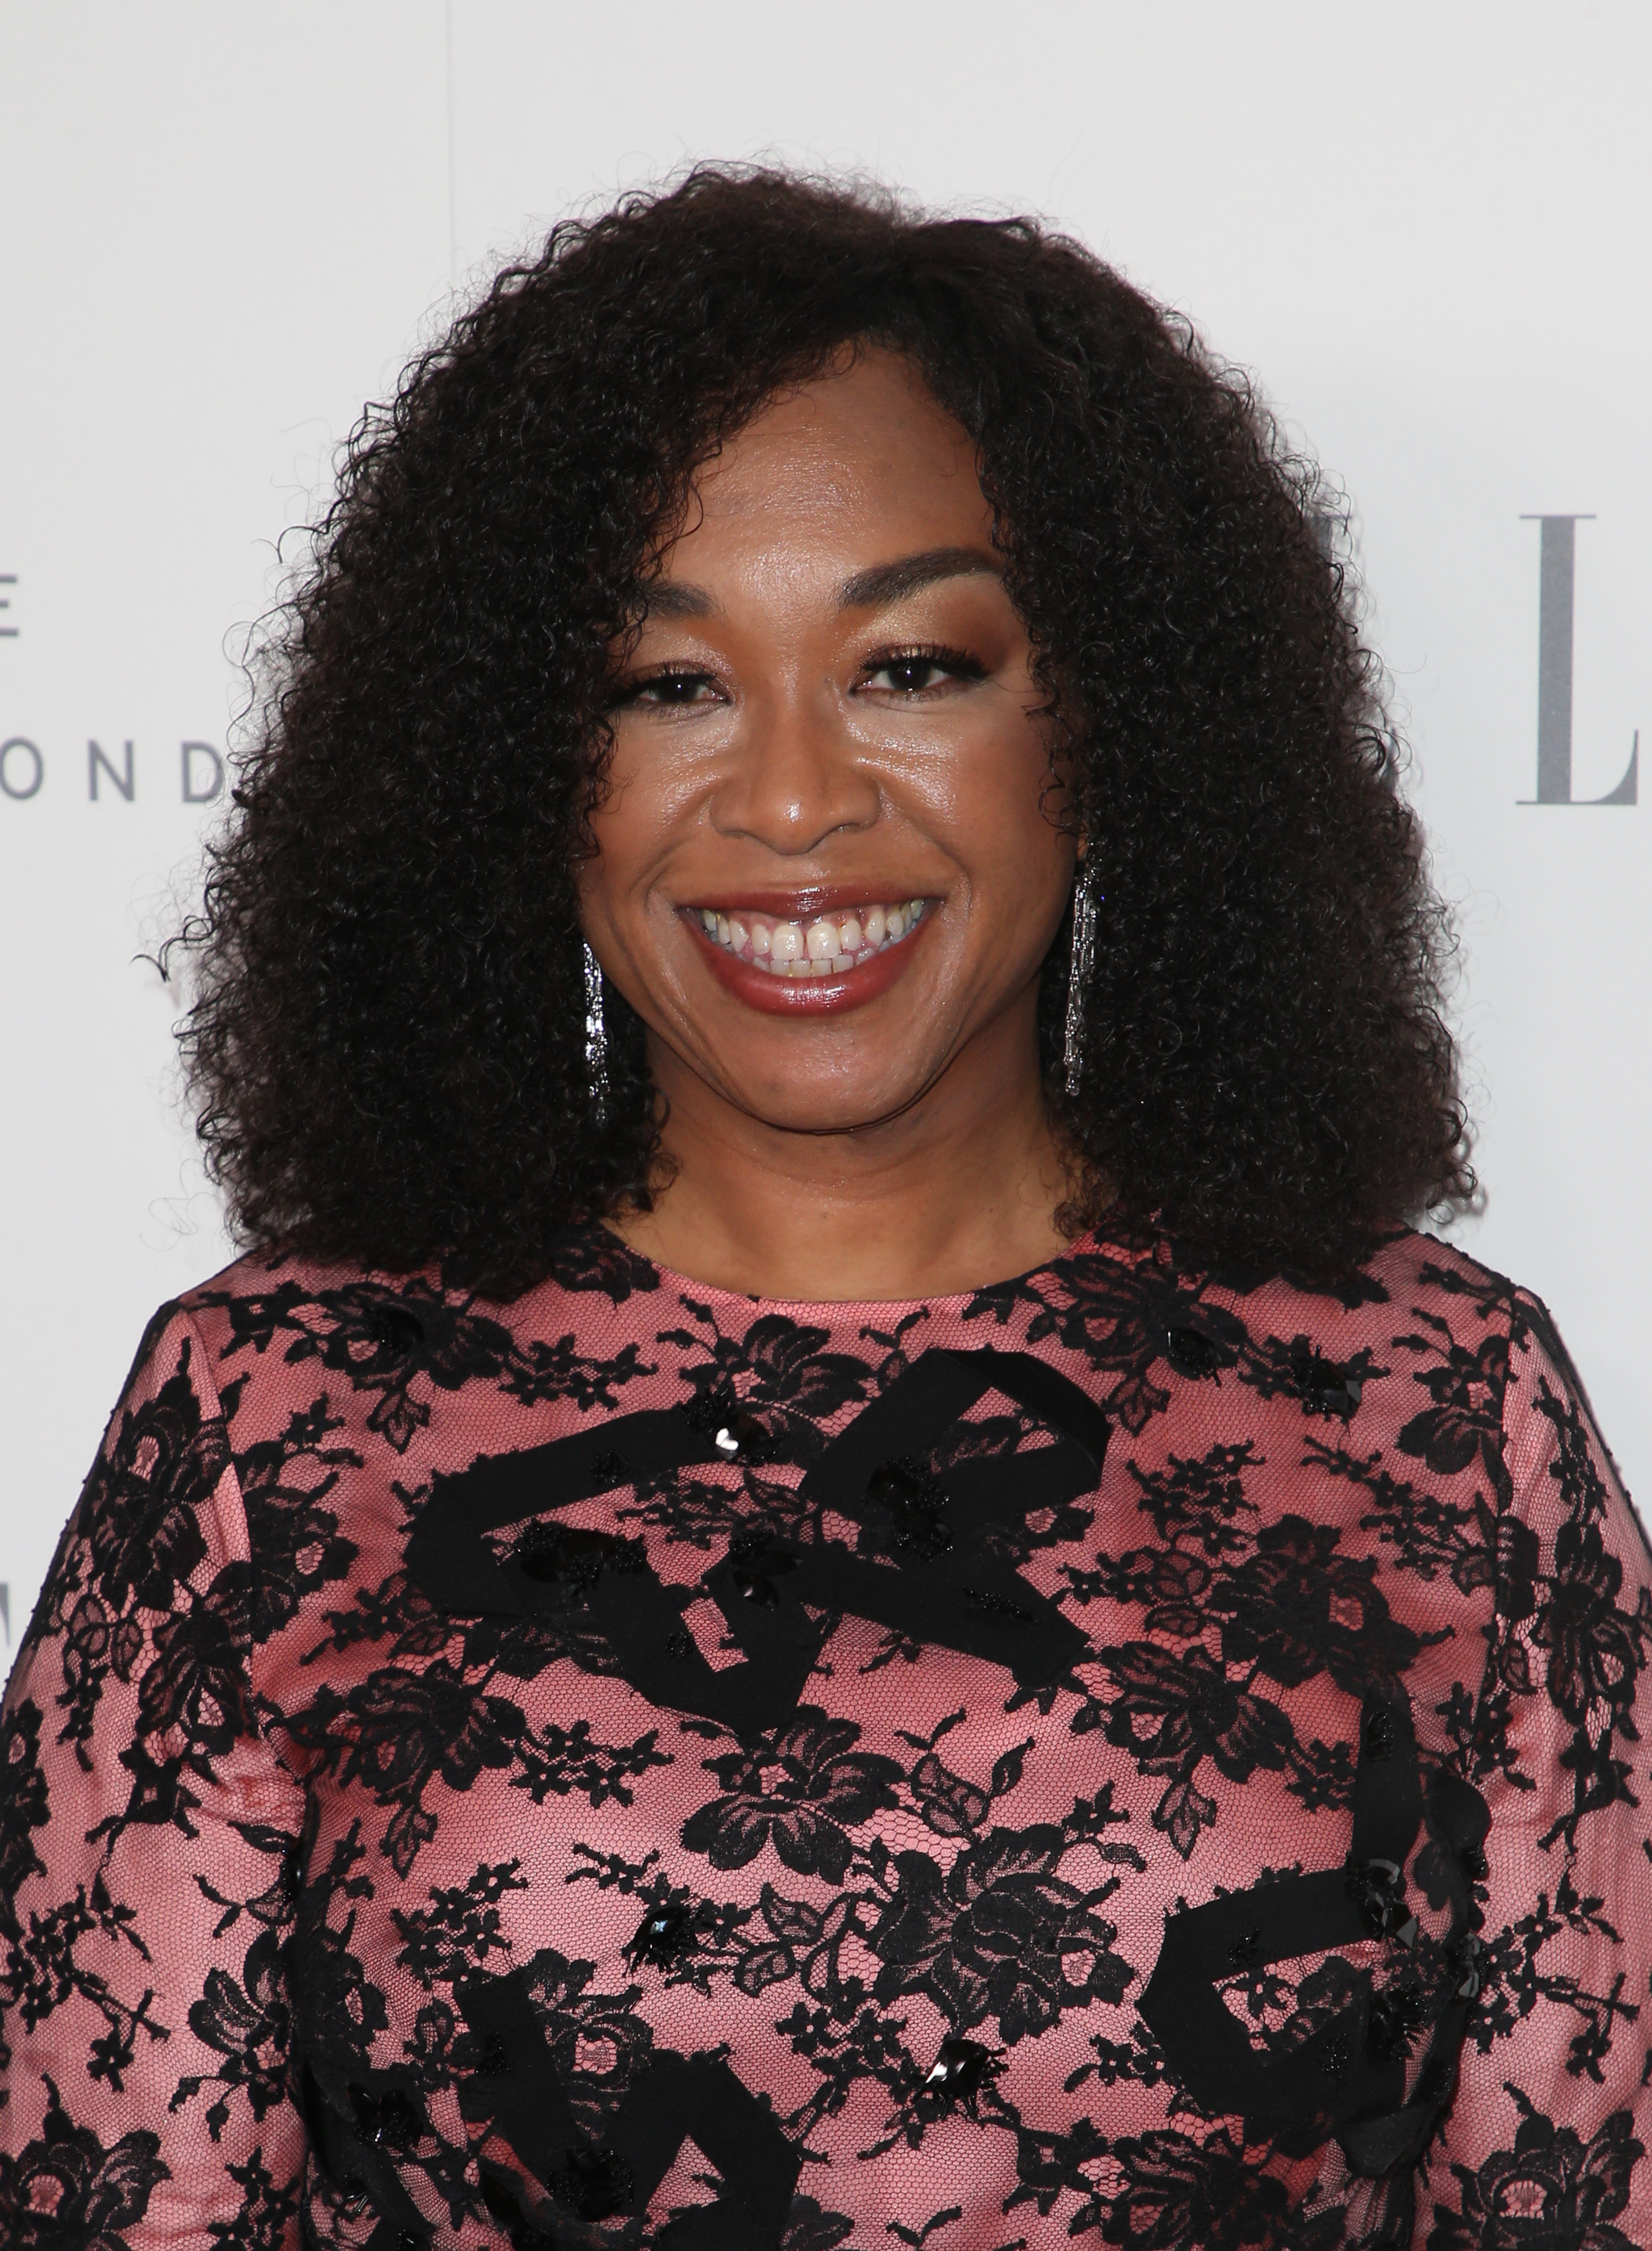 Shonda Rhimes at ELLE 24th Annual Women in Hollywood Celebration - Arrivals